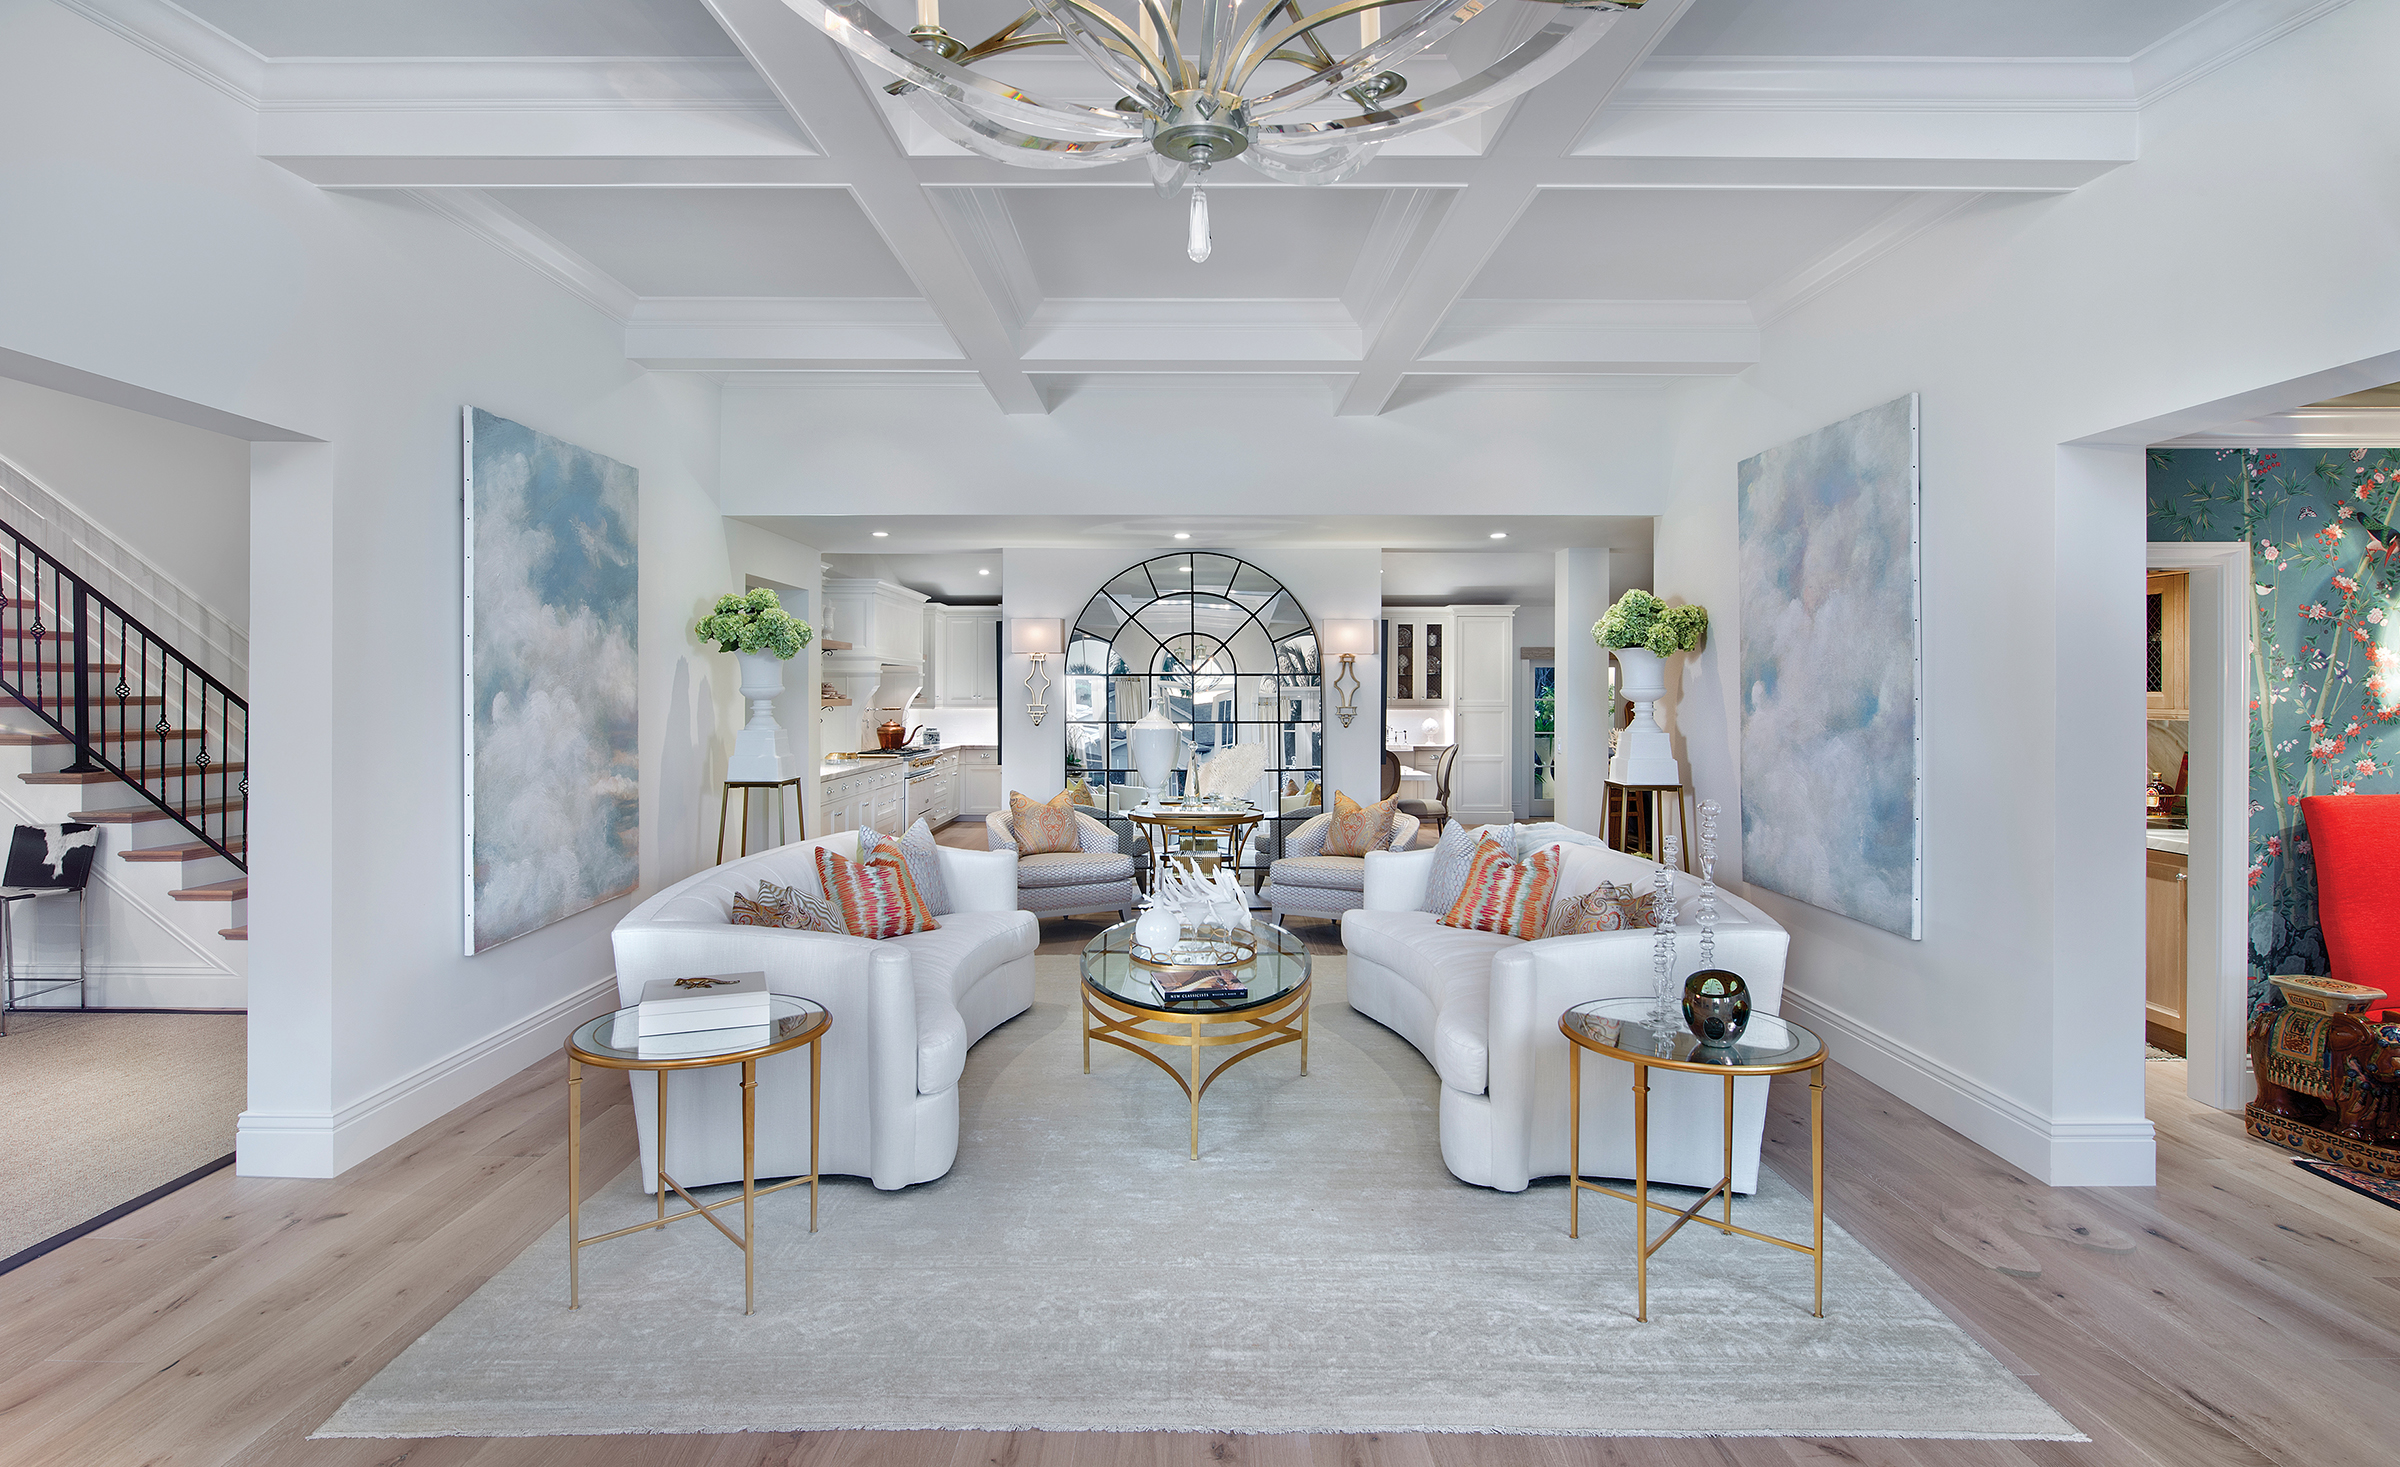  “This home was about surprise elements for me—from the way a hallway would open into an intimate sitting room, to accent items found throughout, I wanted people to be excited about each new space—,” says August. An expertly curated mix of traditiona